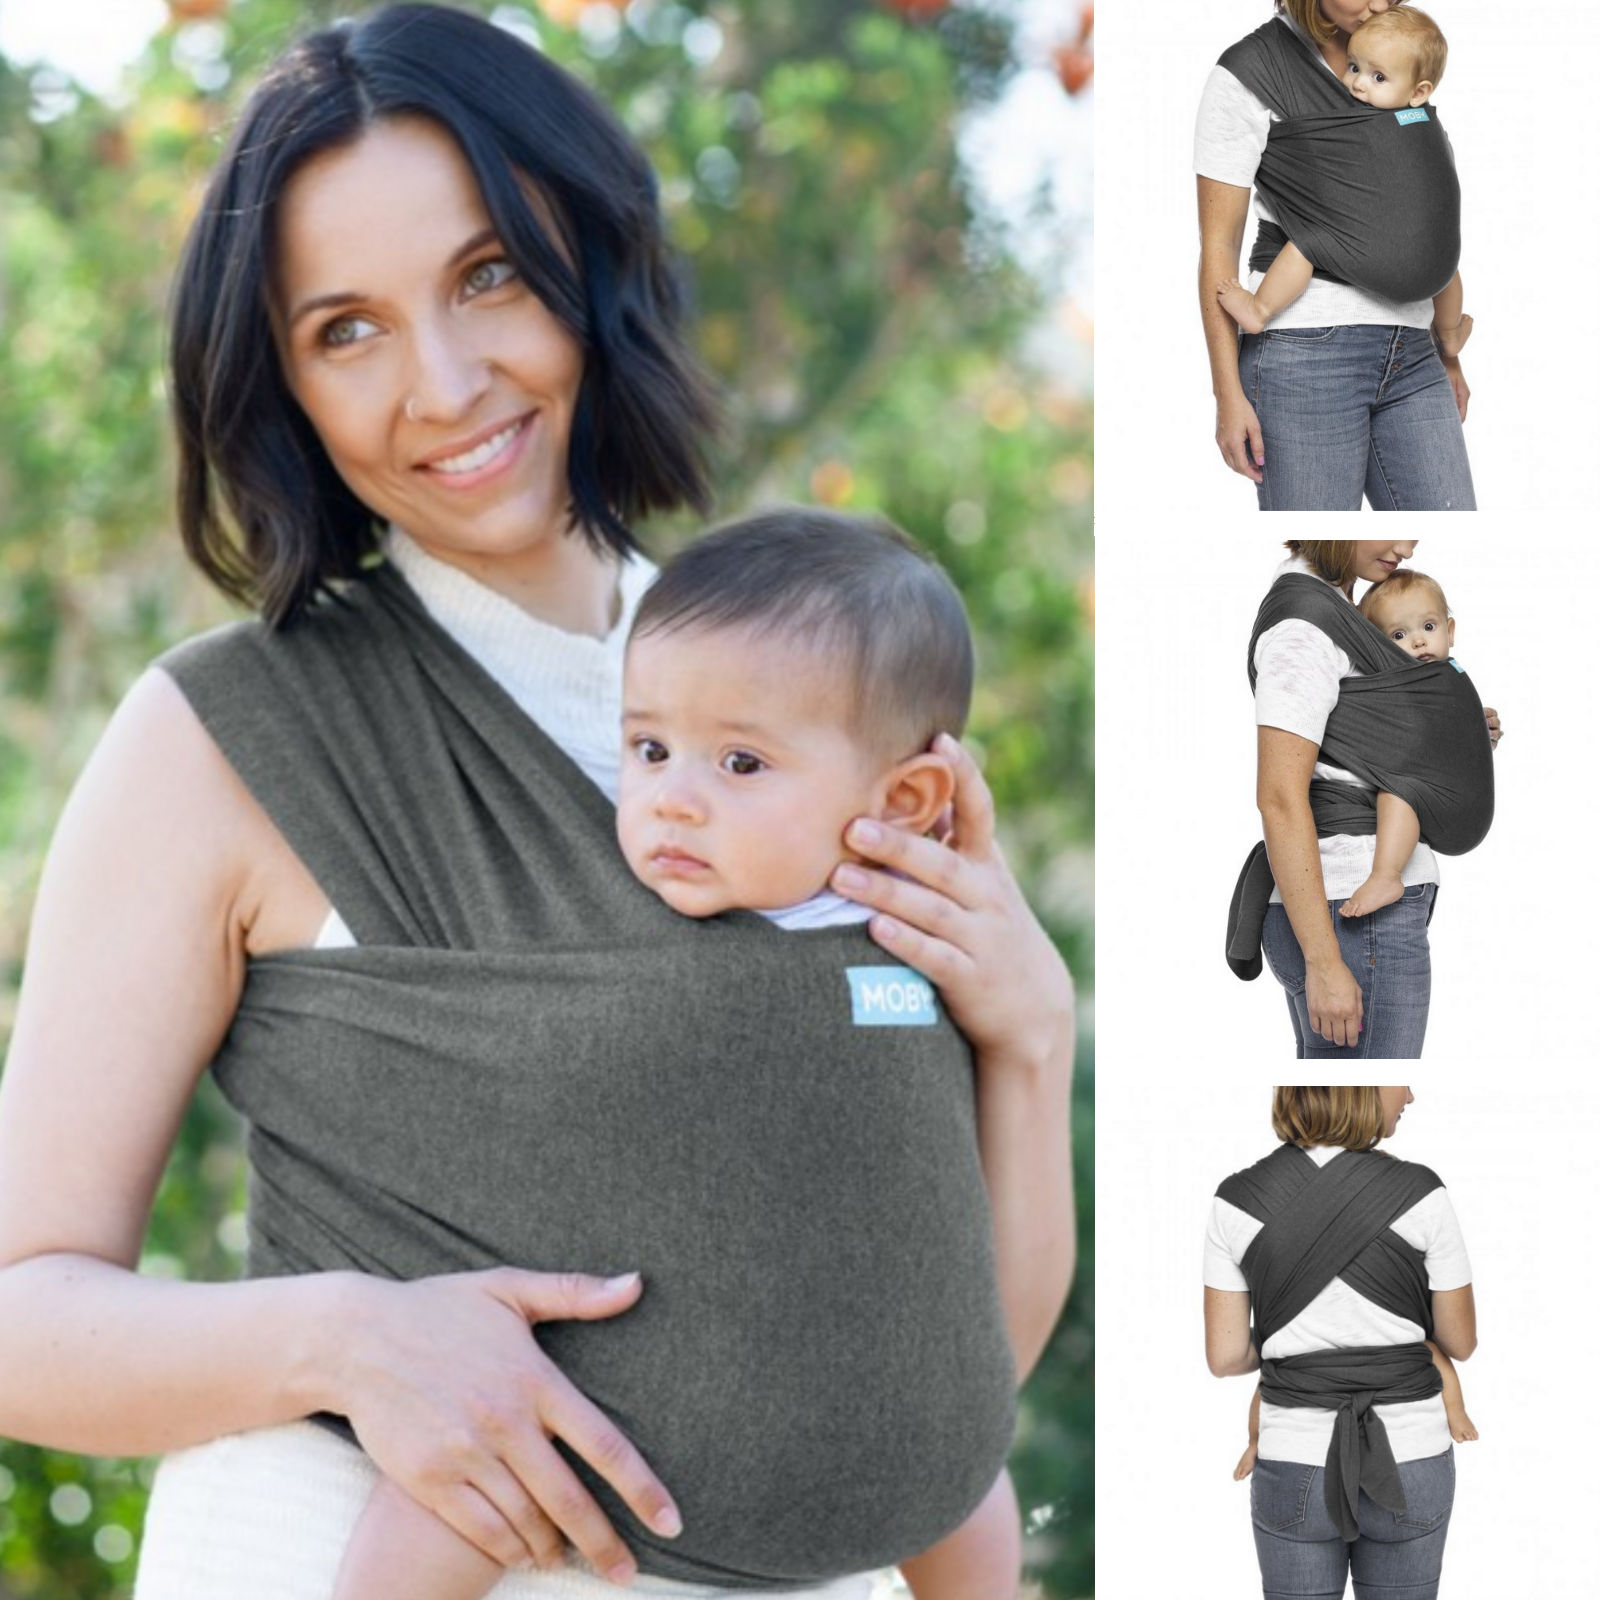 moby wrap toddler